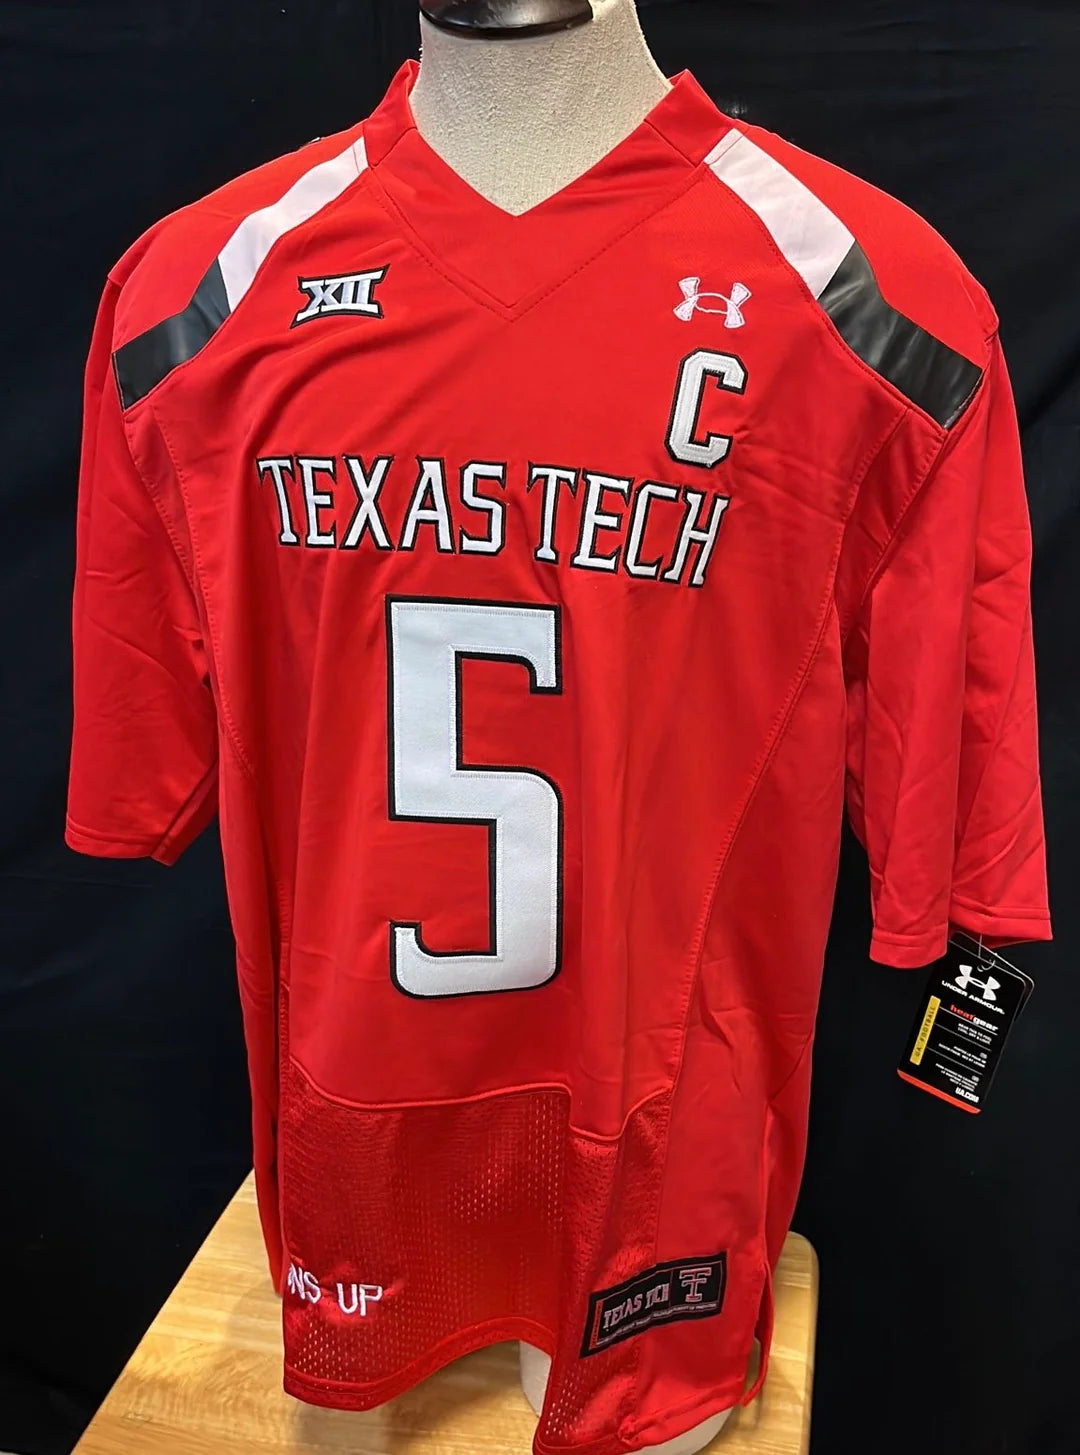 Patrick Mahomes Texas Tech Red Raiders Home Under Armour NCAA College Football Jersey